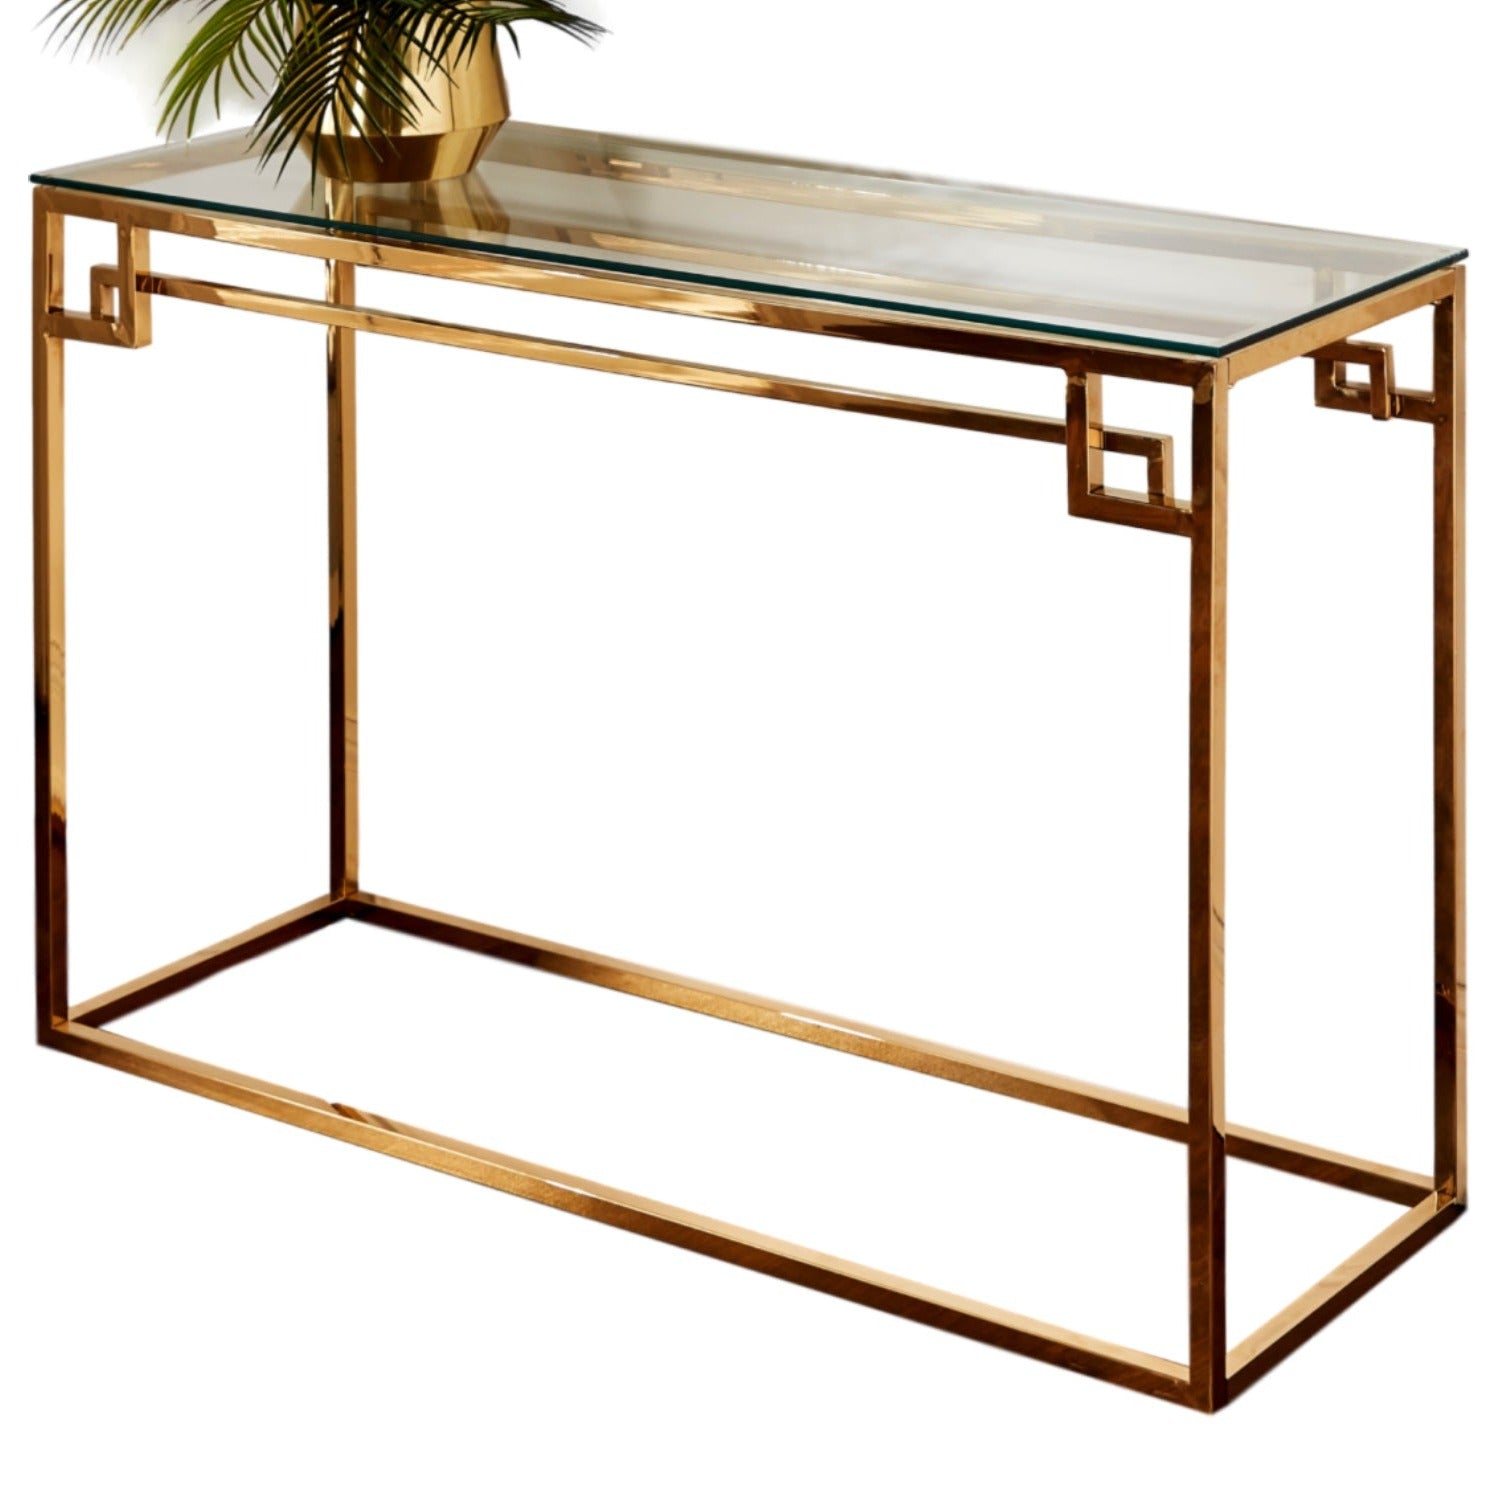 Cesar gold console table by Native